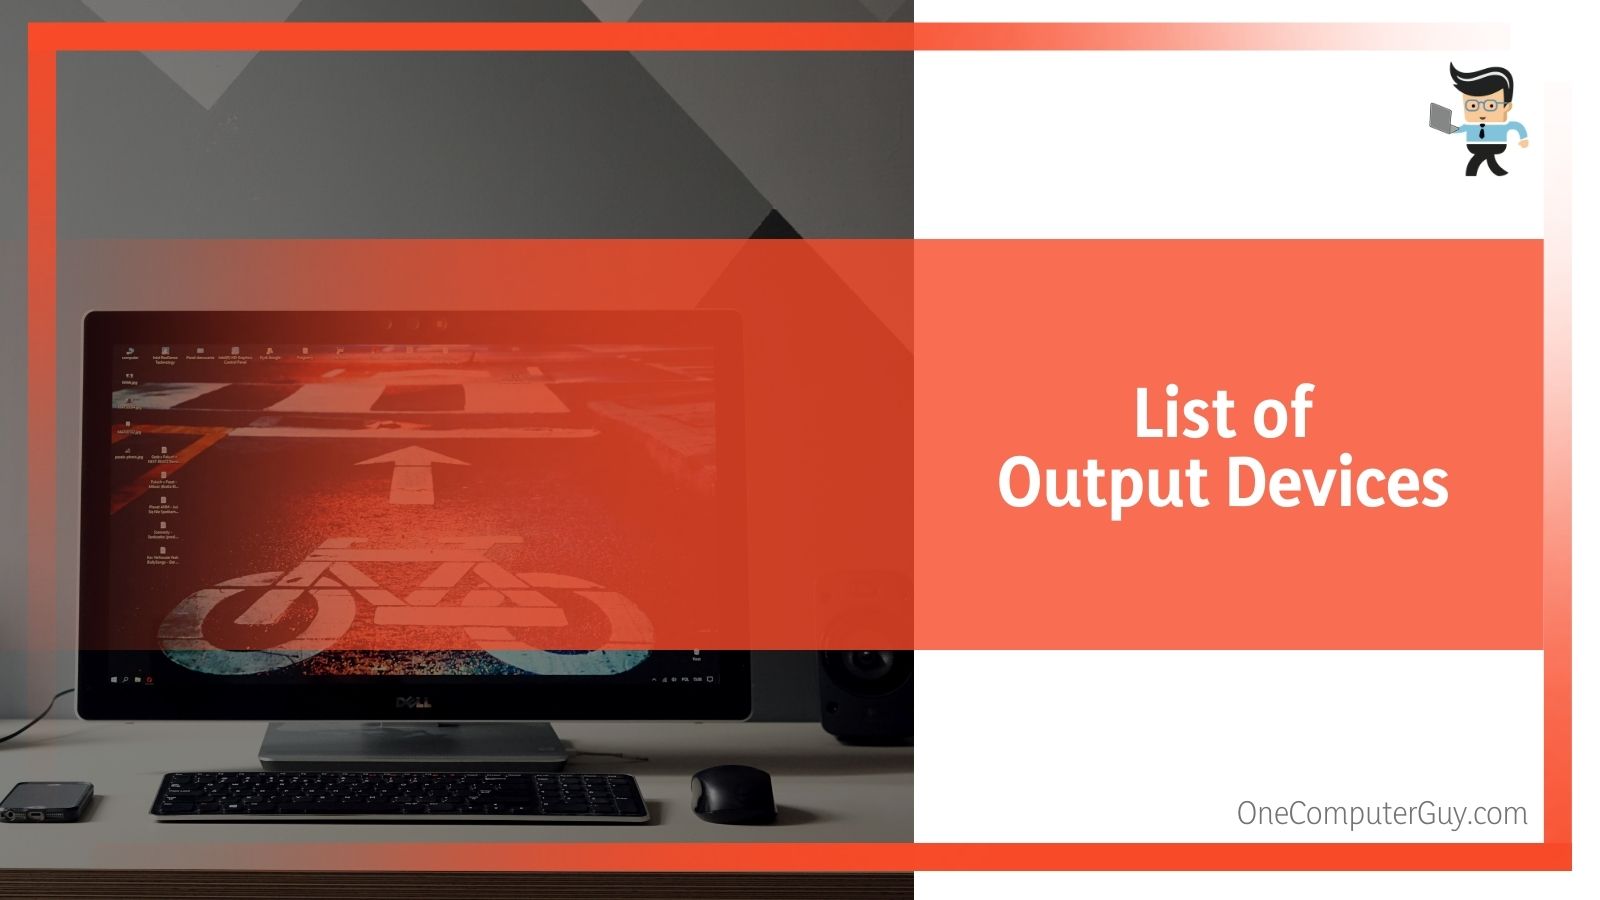 List of Output Devices